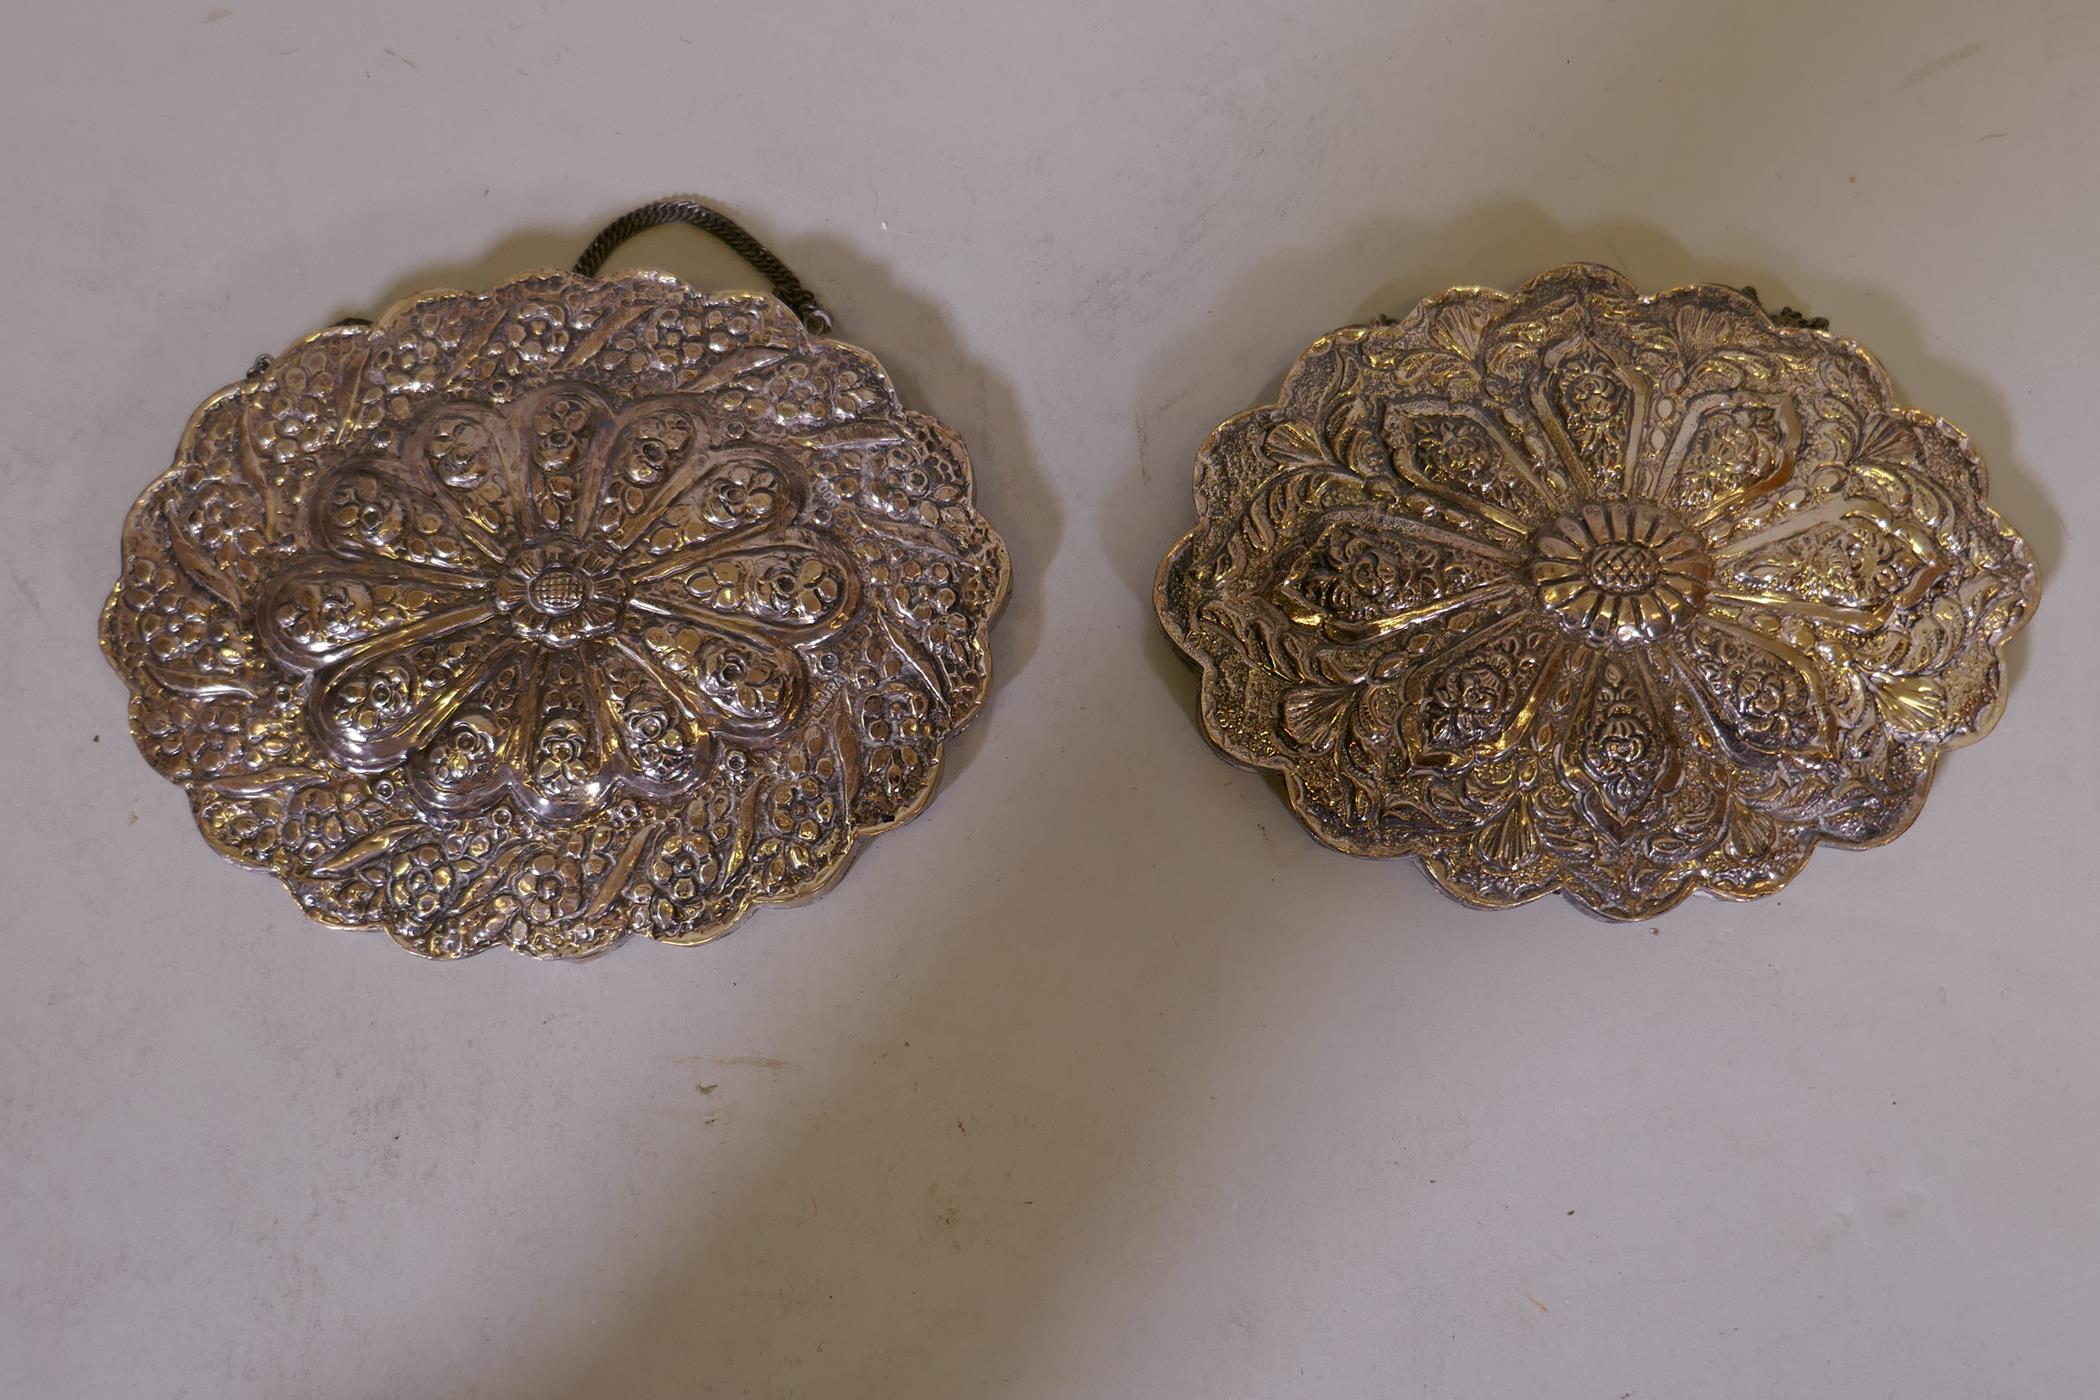 A pair of Turkish silver mirrors with repousse decoration, marked Tavra 900 6" x 5" - Image 2 of 2